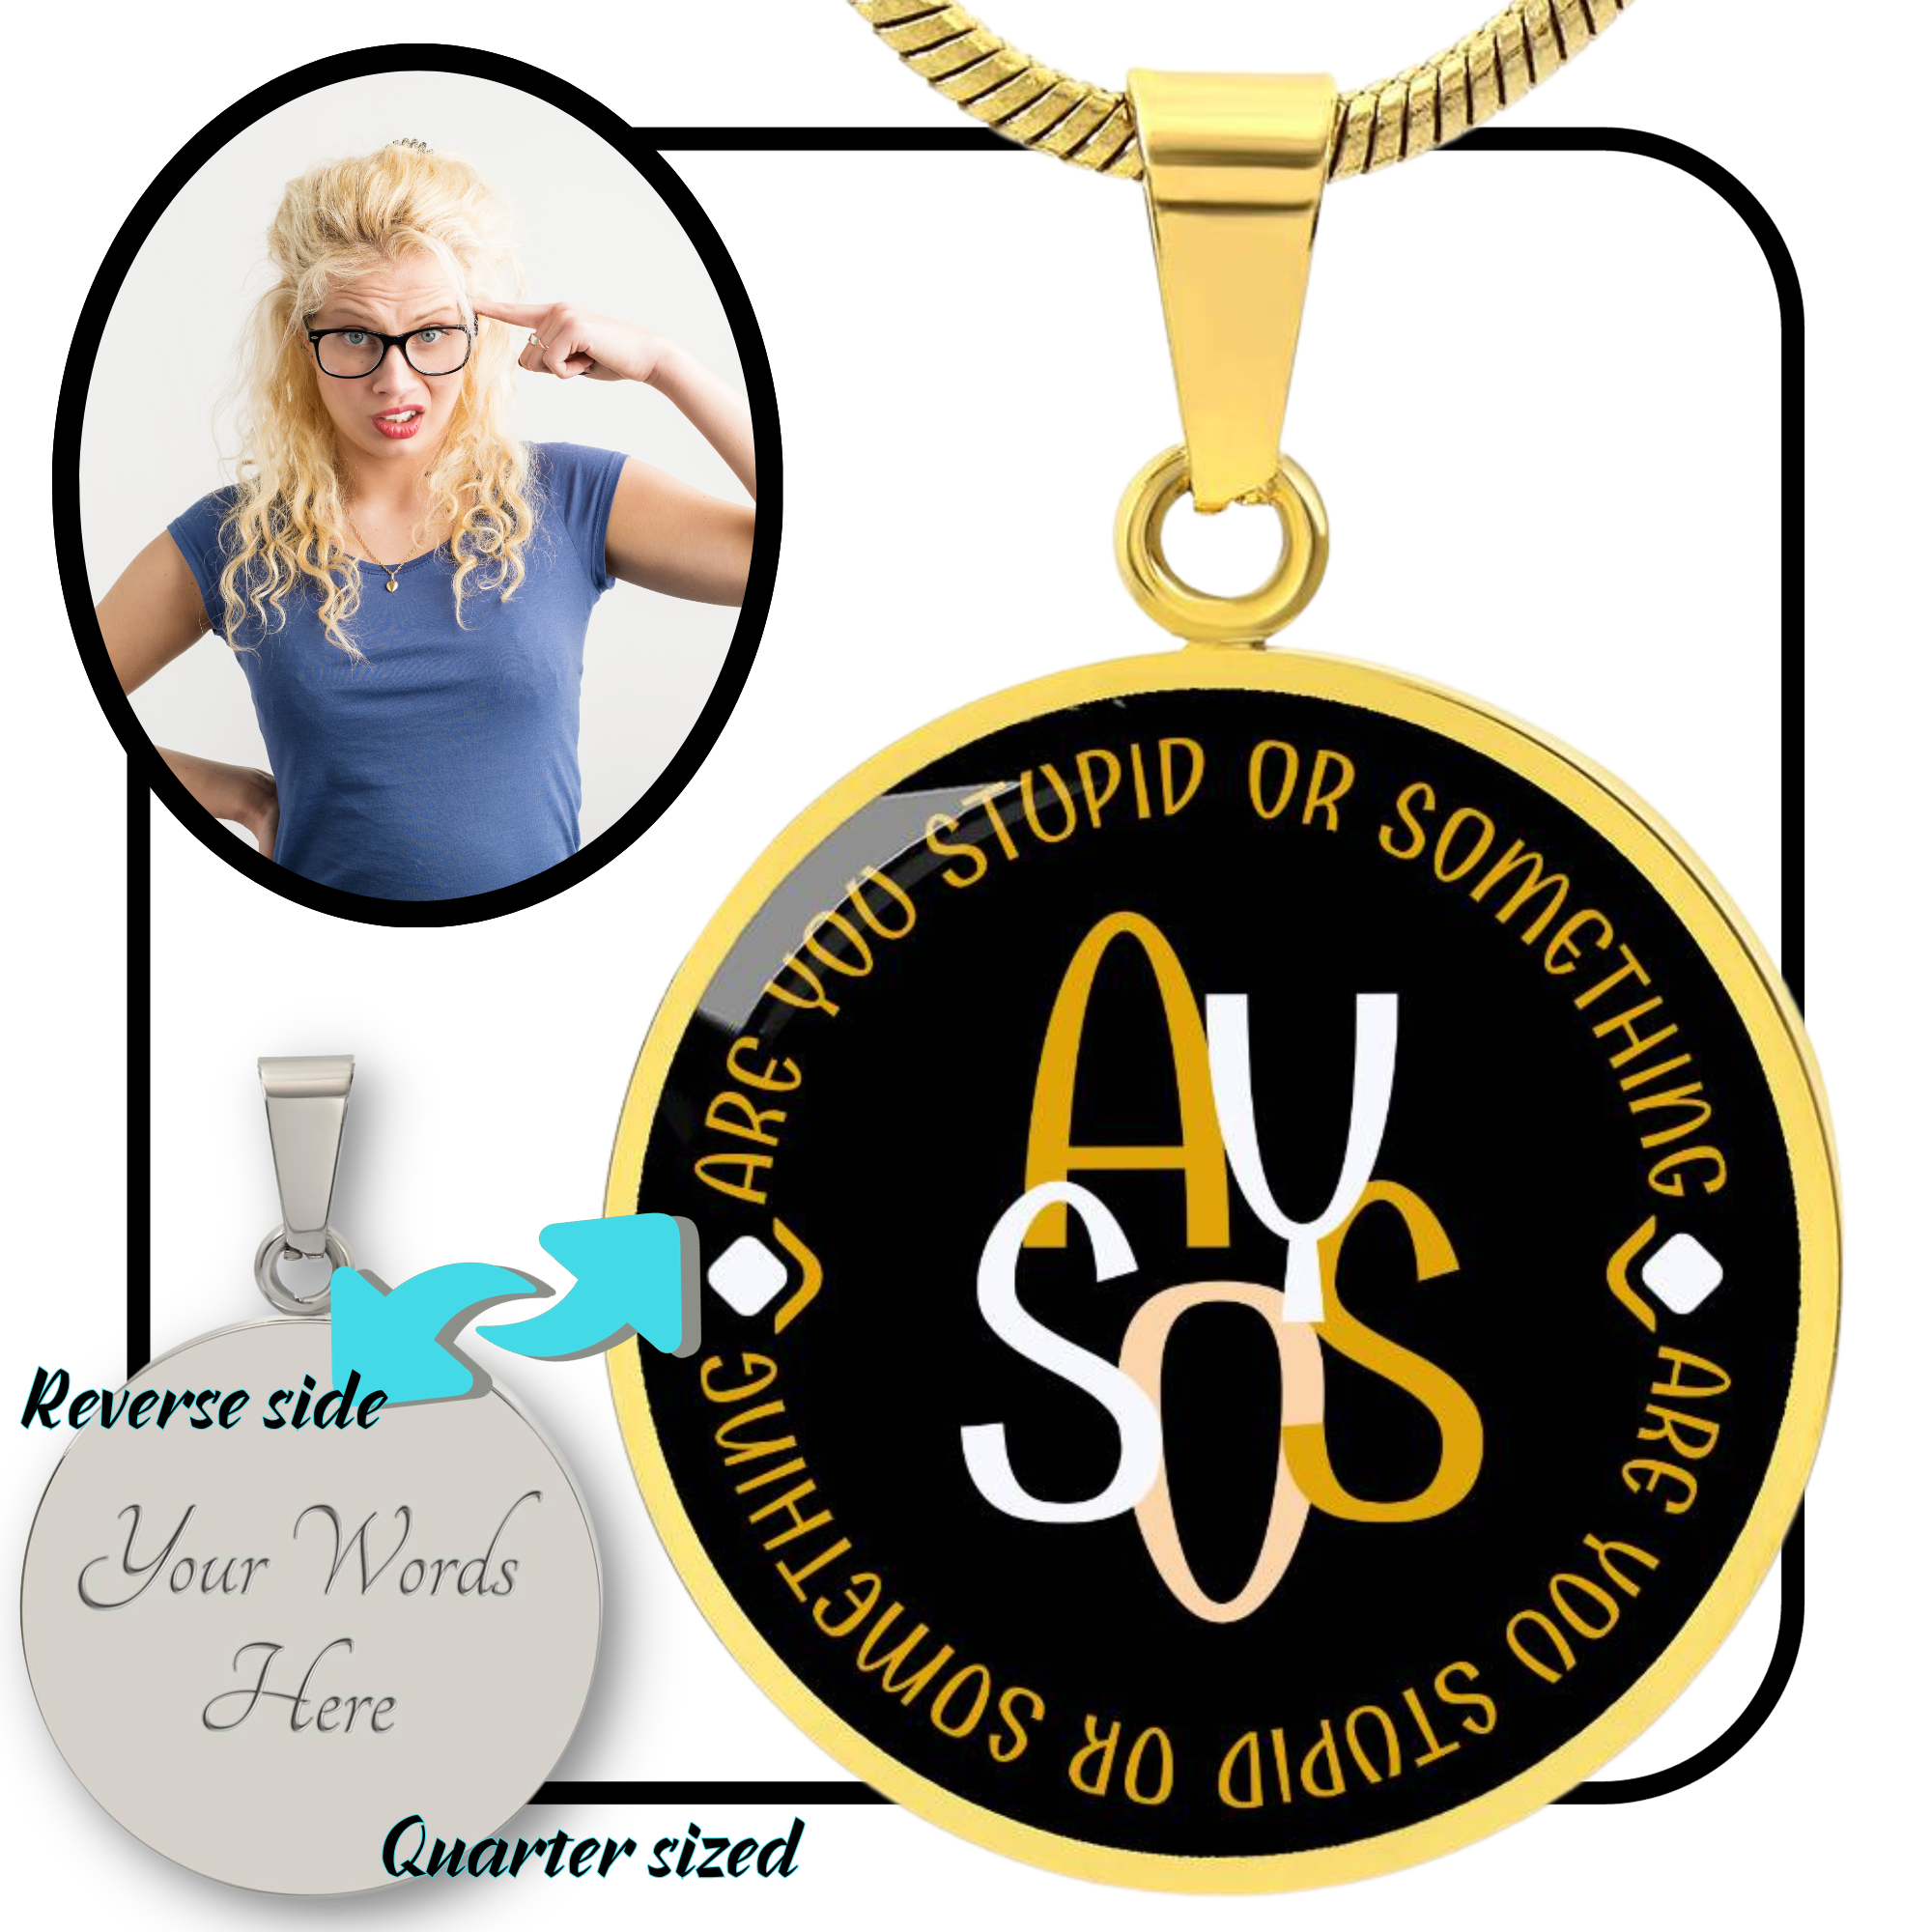 AYSOS - Are you stupid or something || Pendant Necklace || PERSONALIZABLE